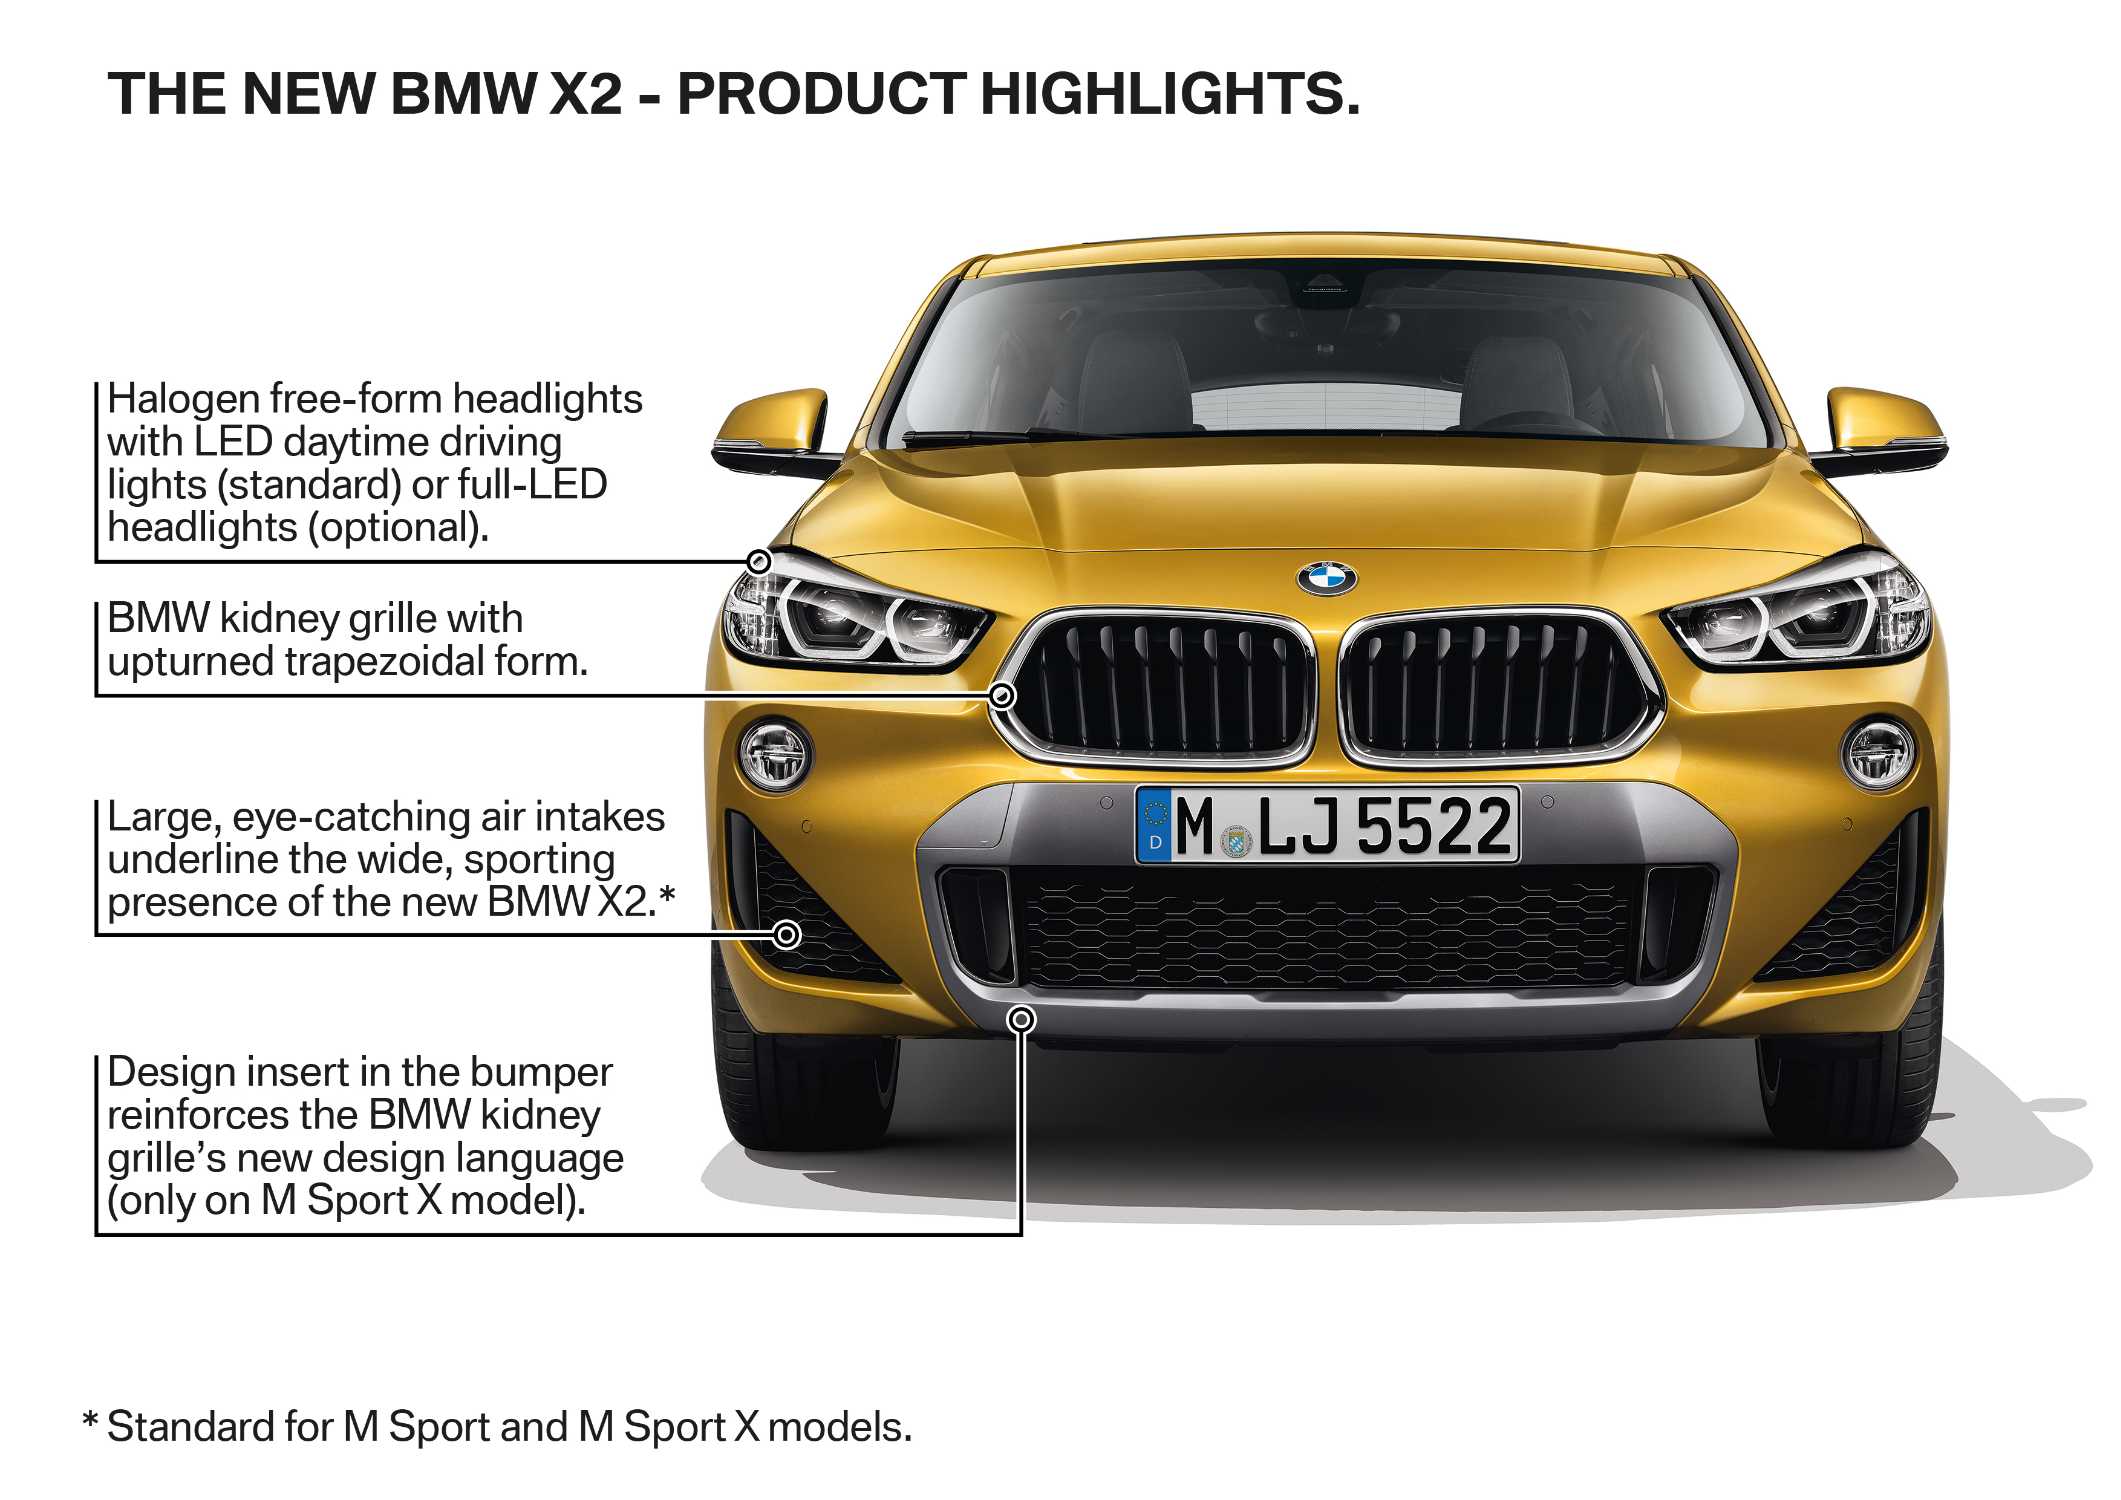 The brand new BMW X2 - Product Highlights (10/2017).